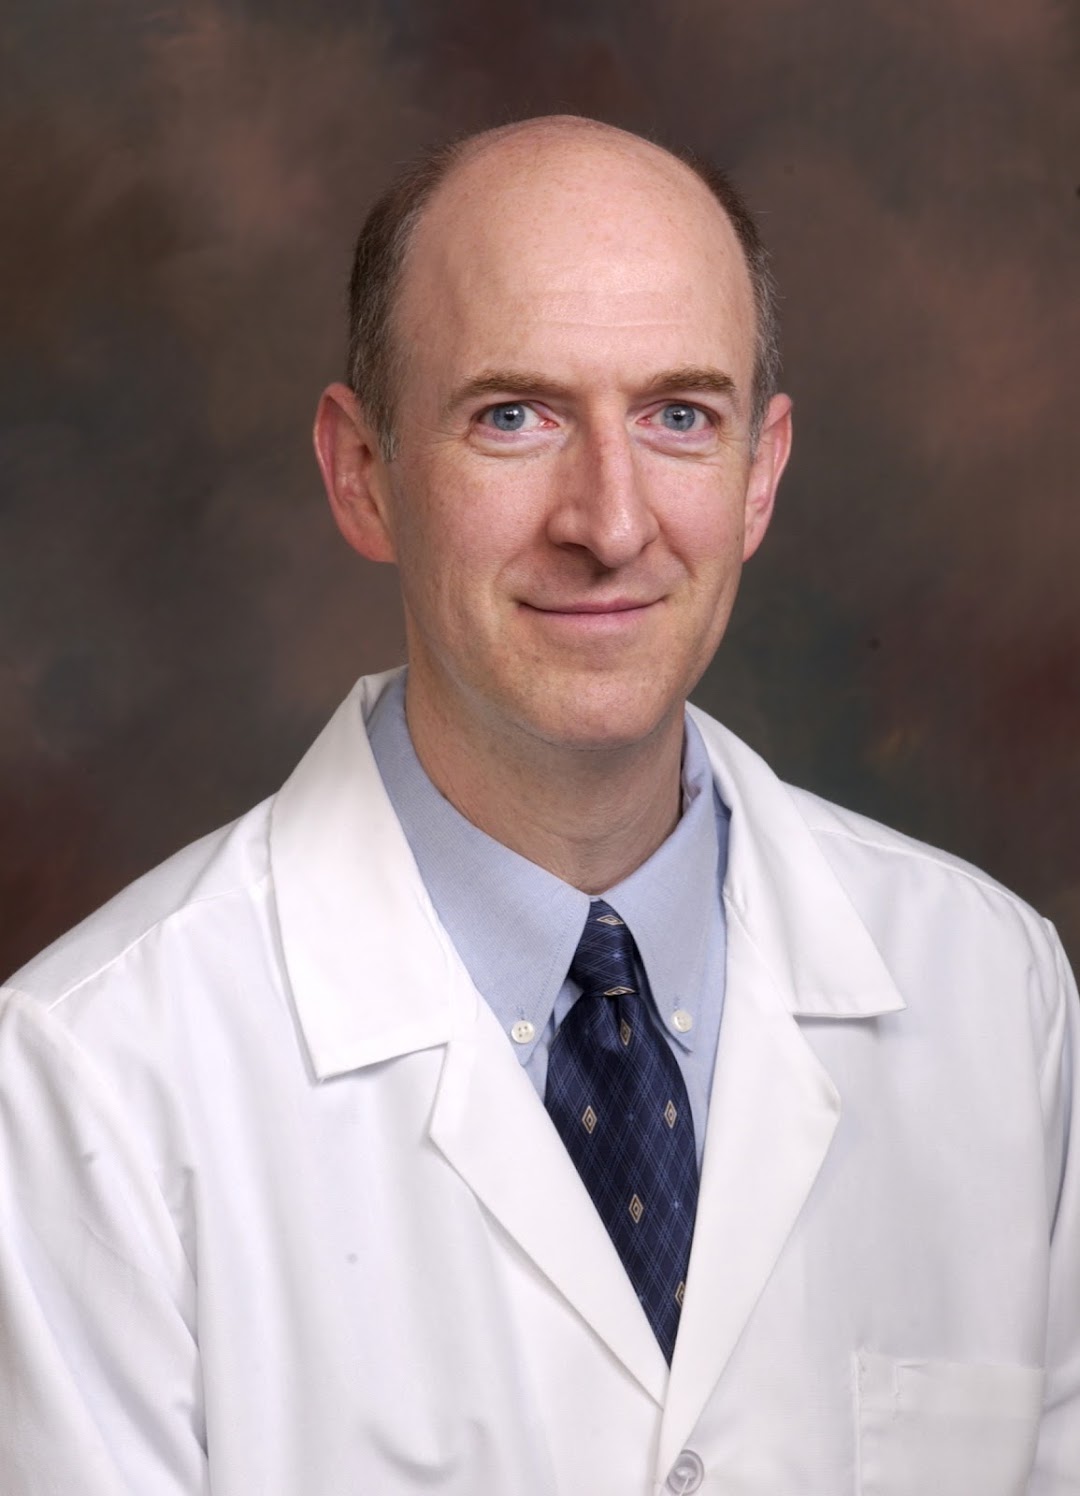 James W. Peterson, MD